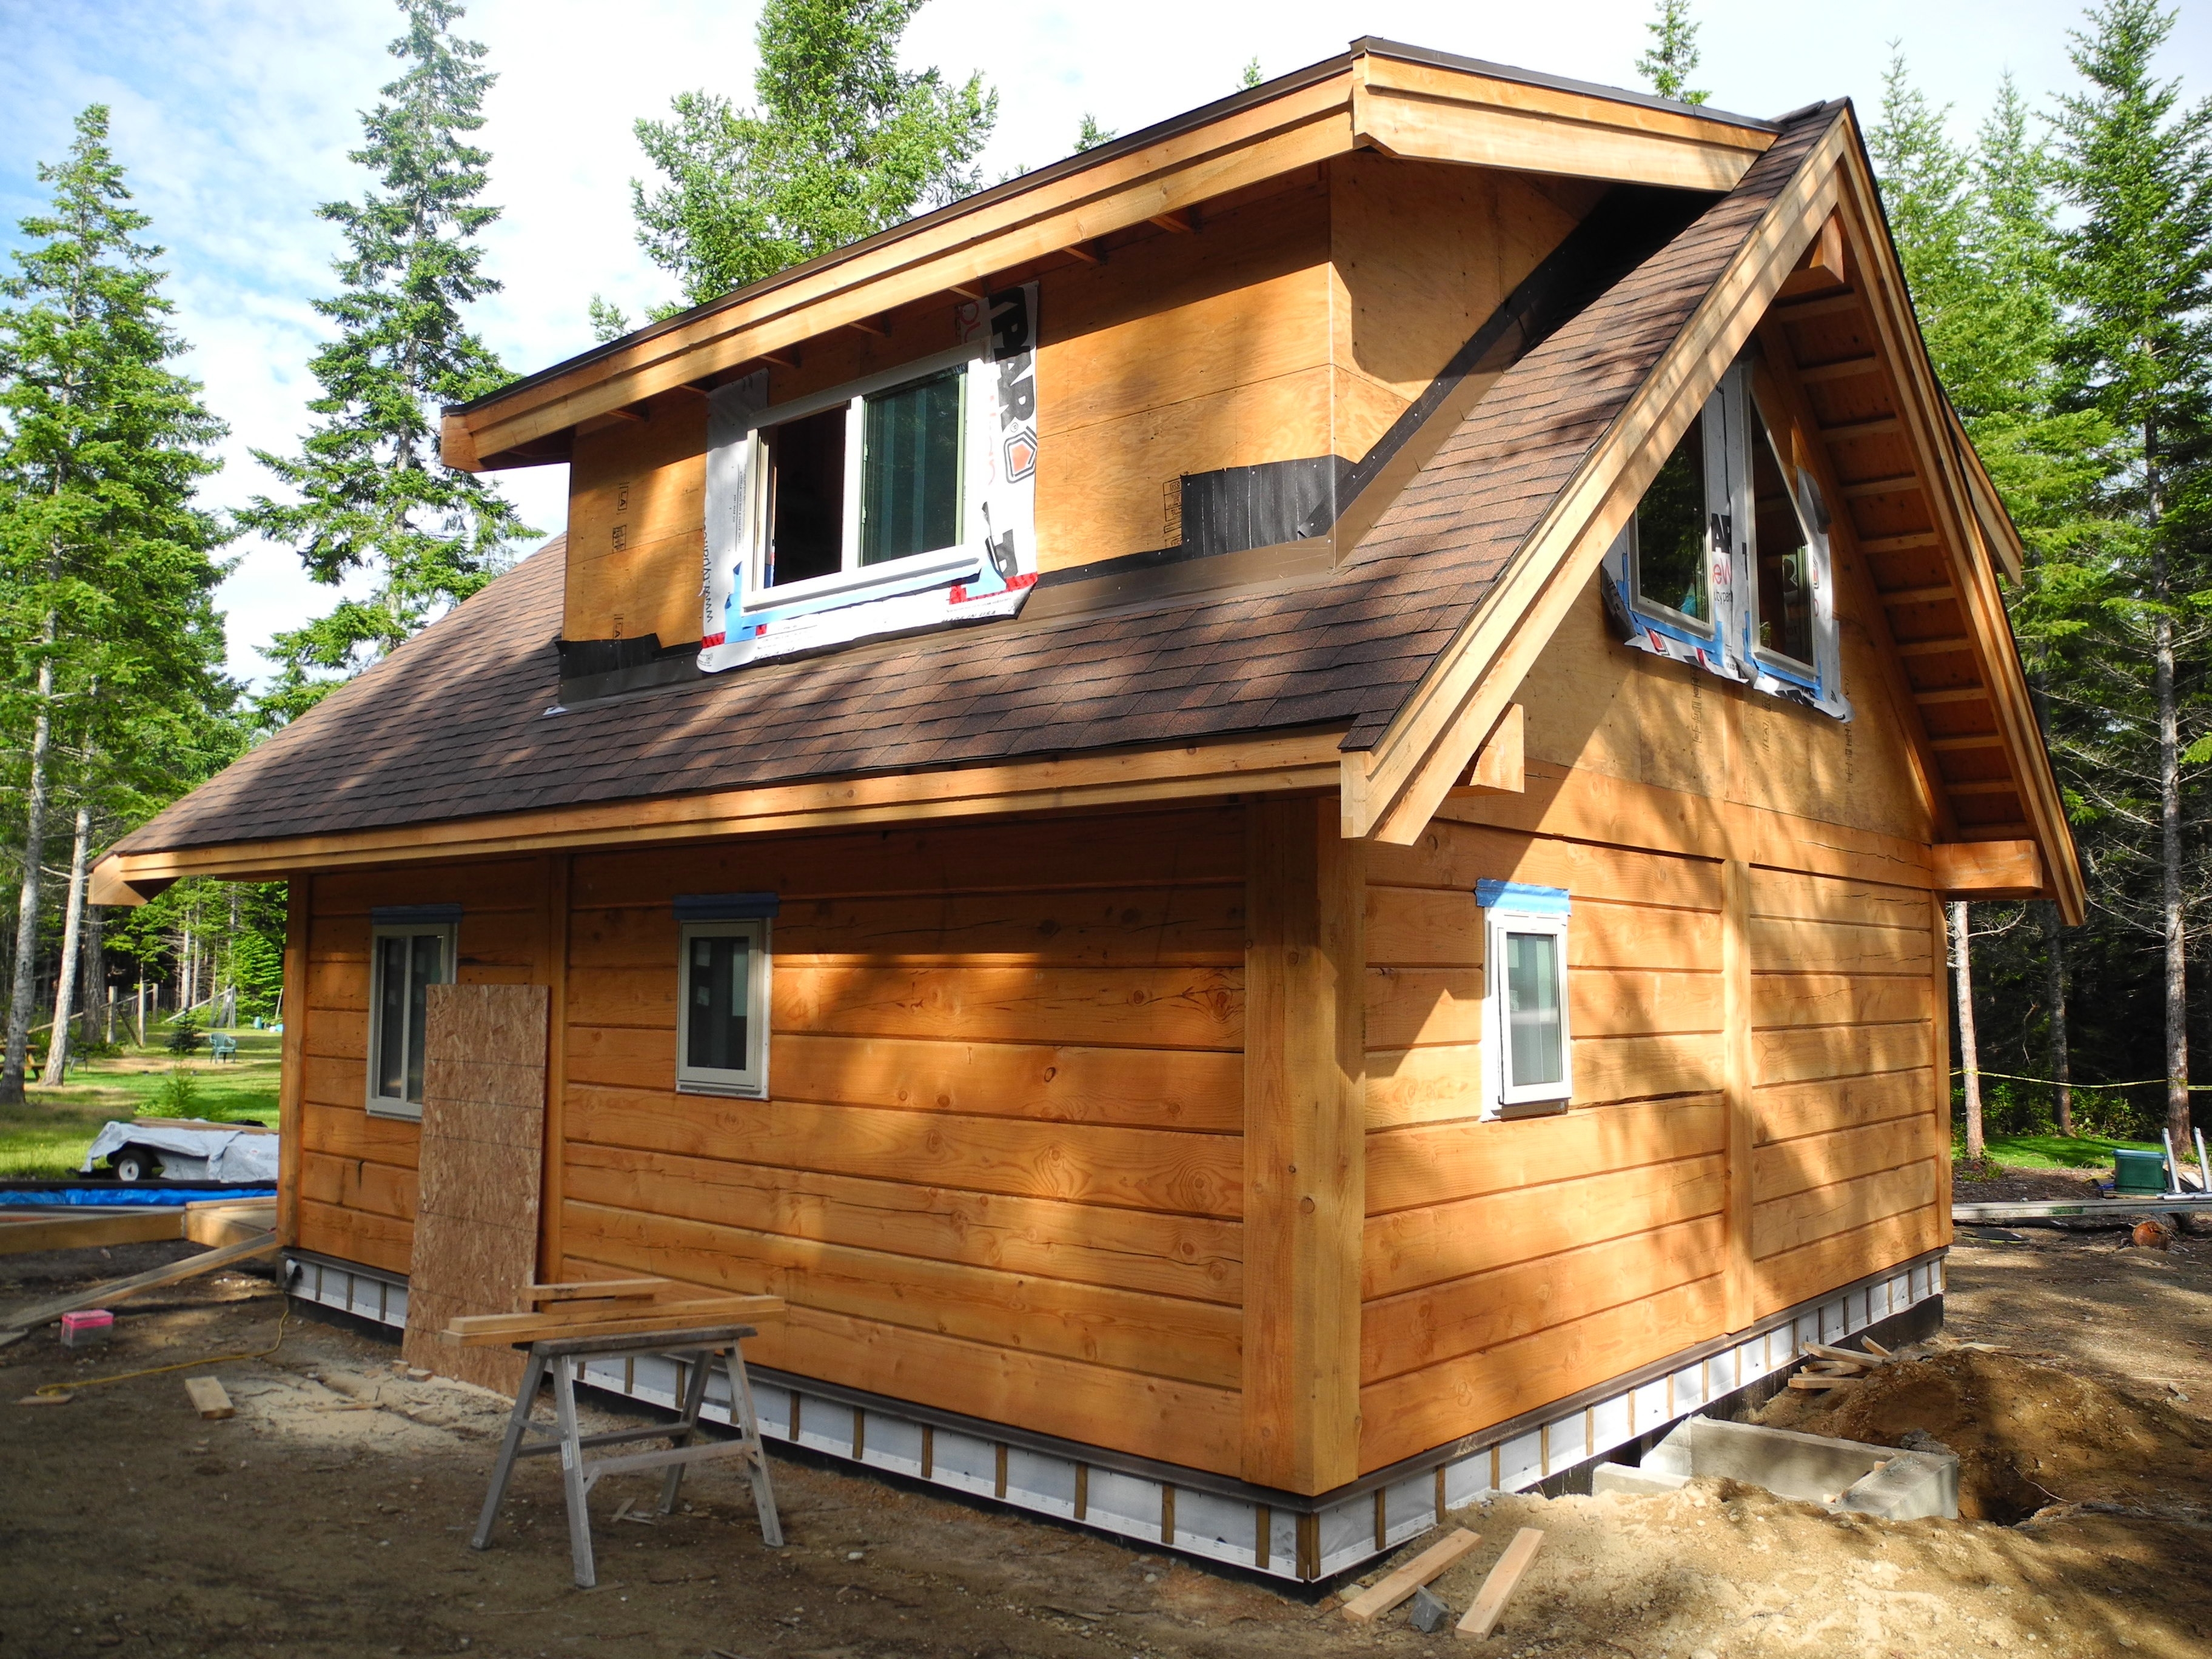 Gulf Island Cabin Update ⋆ Tamlin Homes | Timber Frame Home Packages